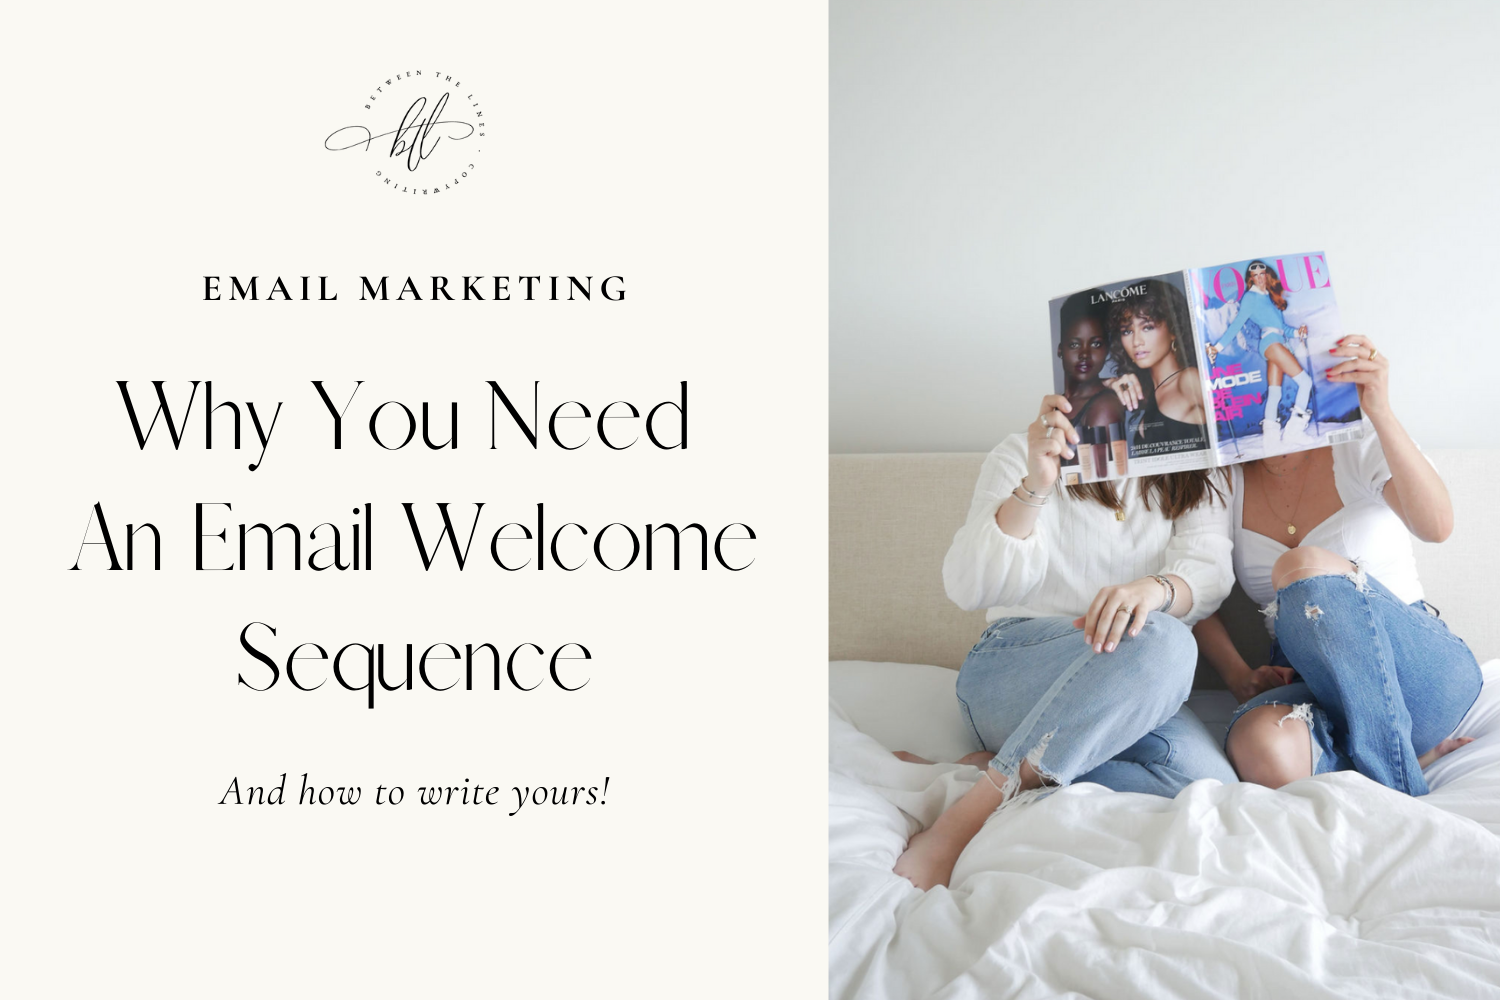 Writing An Email Welcome Sequence: What It Is And Why You Need One